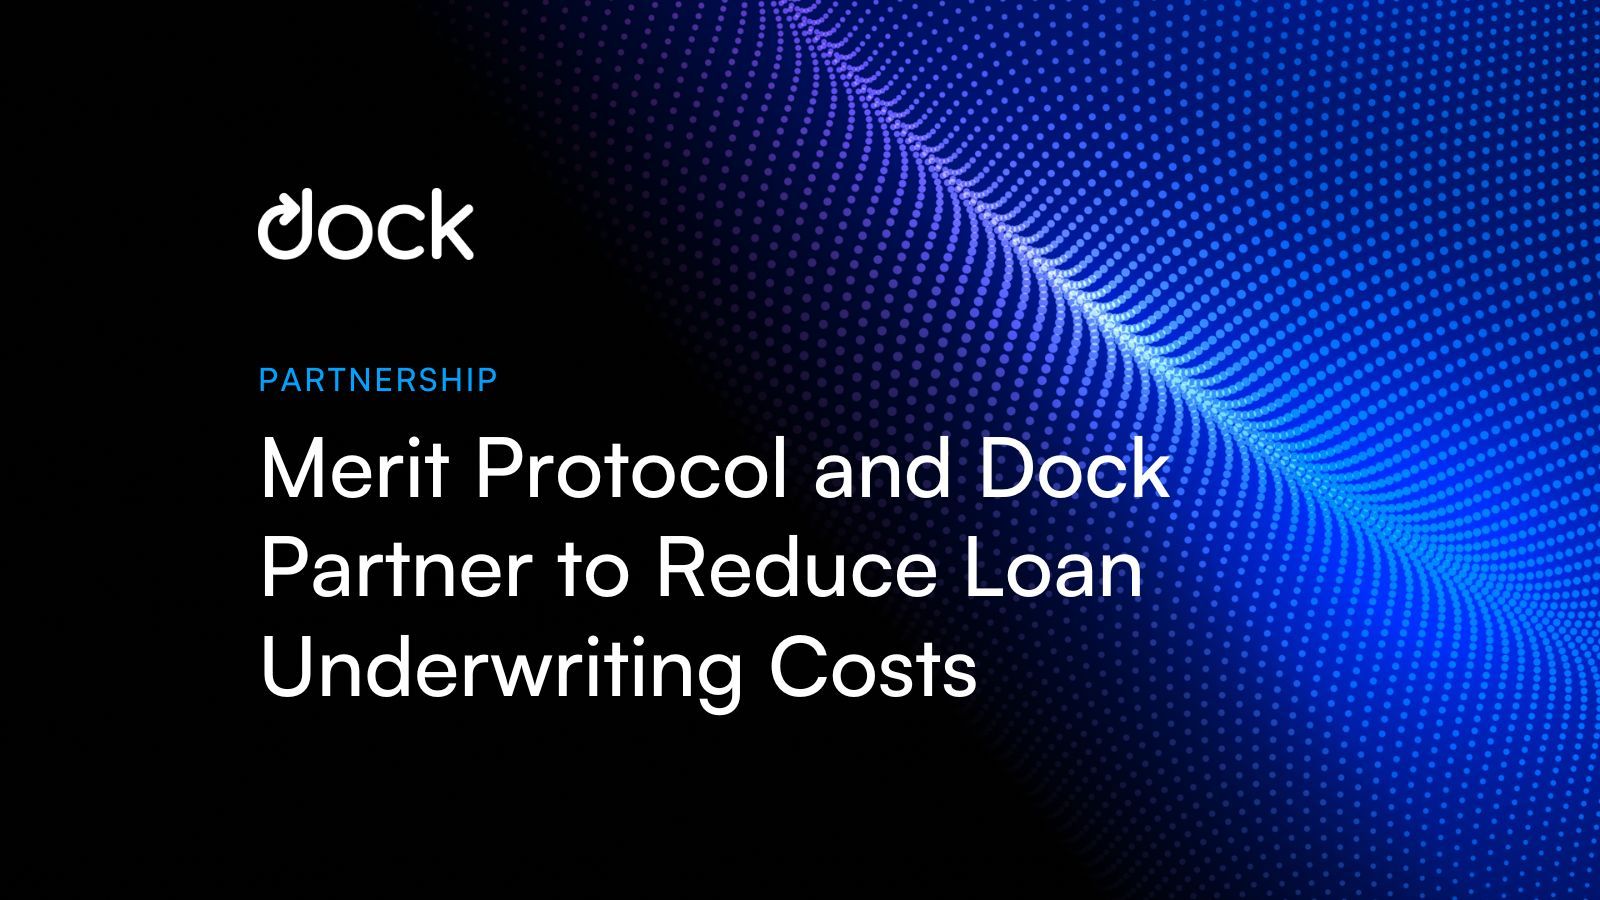 Merit Protocol and Dock Partner to Reduce Loan Underwriting Costs